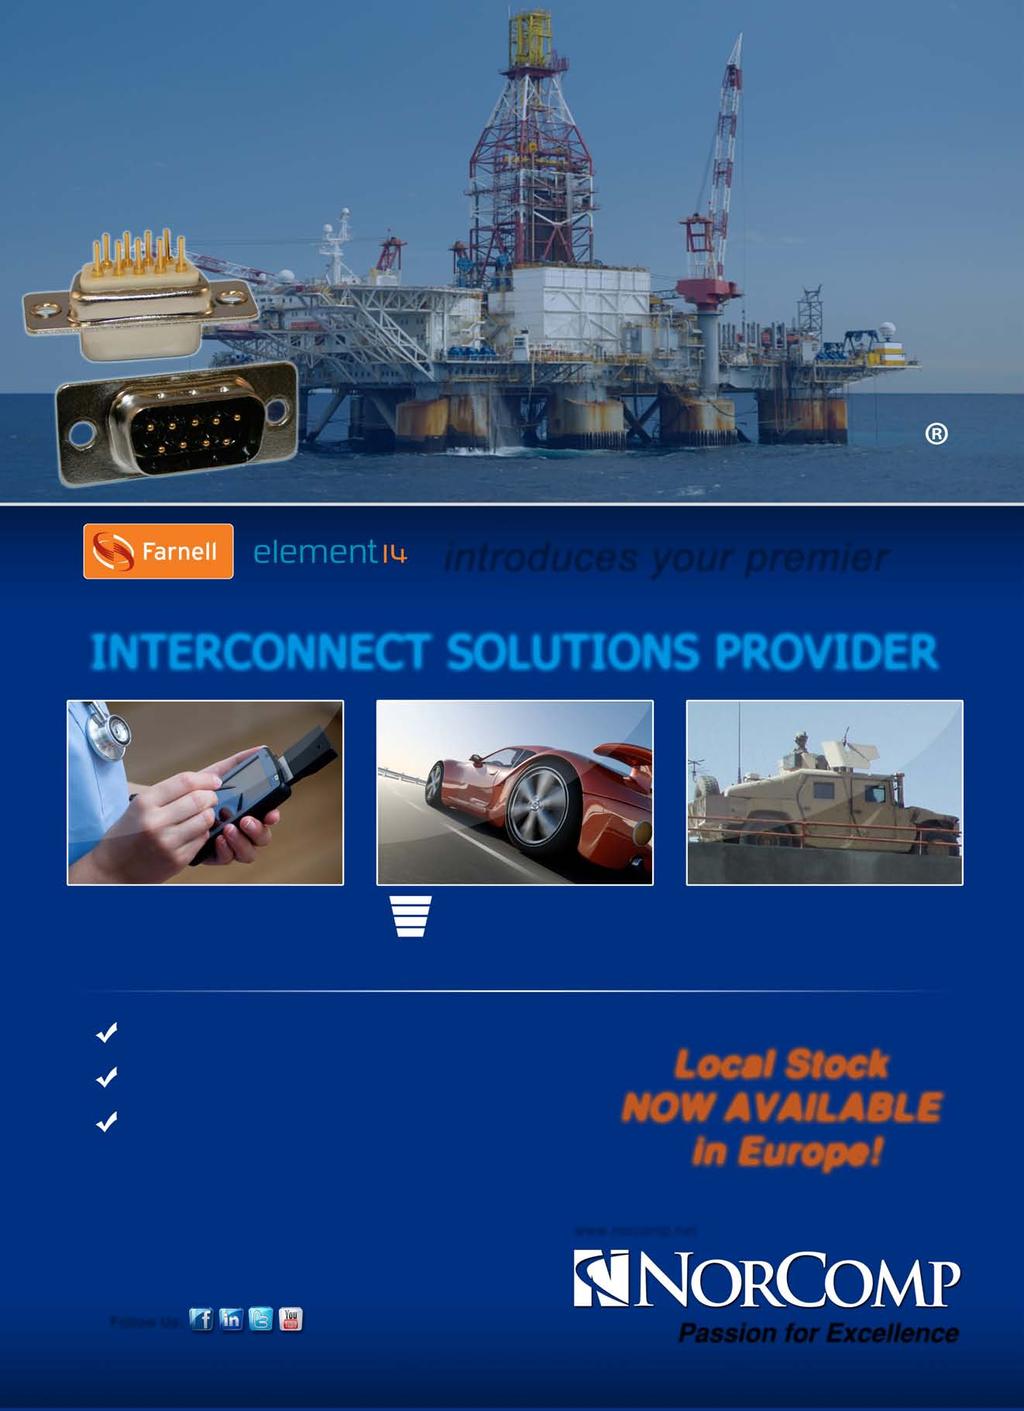 introduces your premier INTERCONNECT SOLUTIONS PROVIDER M SERIES NorComp is a leader in the design, world wide manufacture, and marketing of I/O interconnect products.